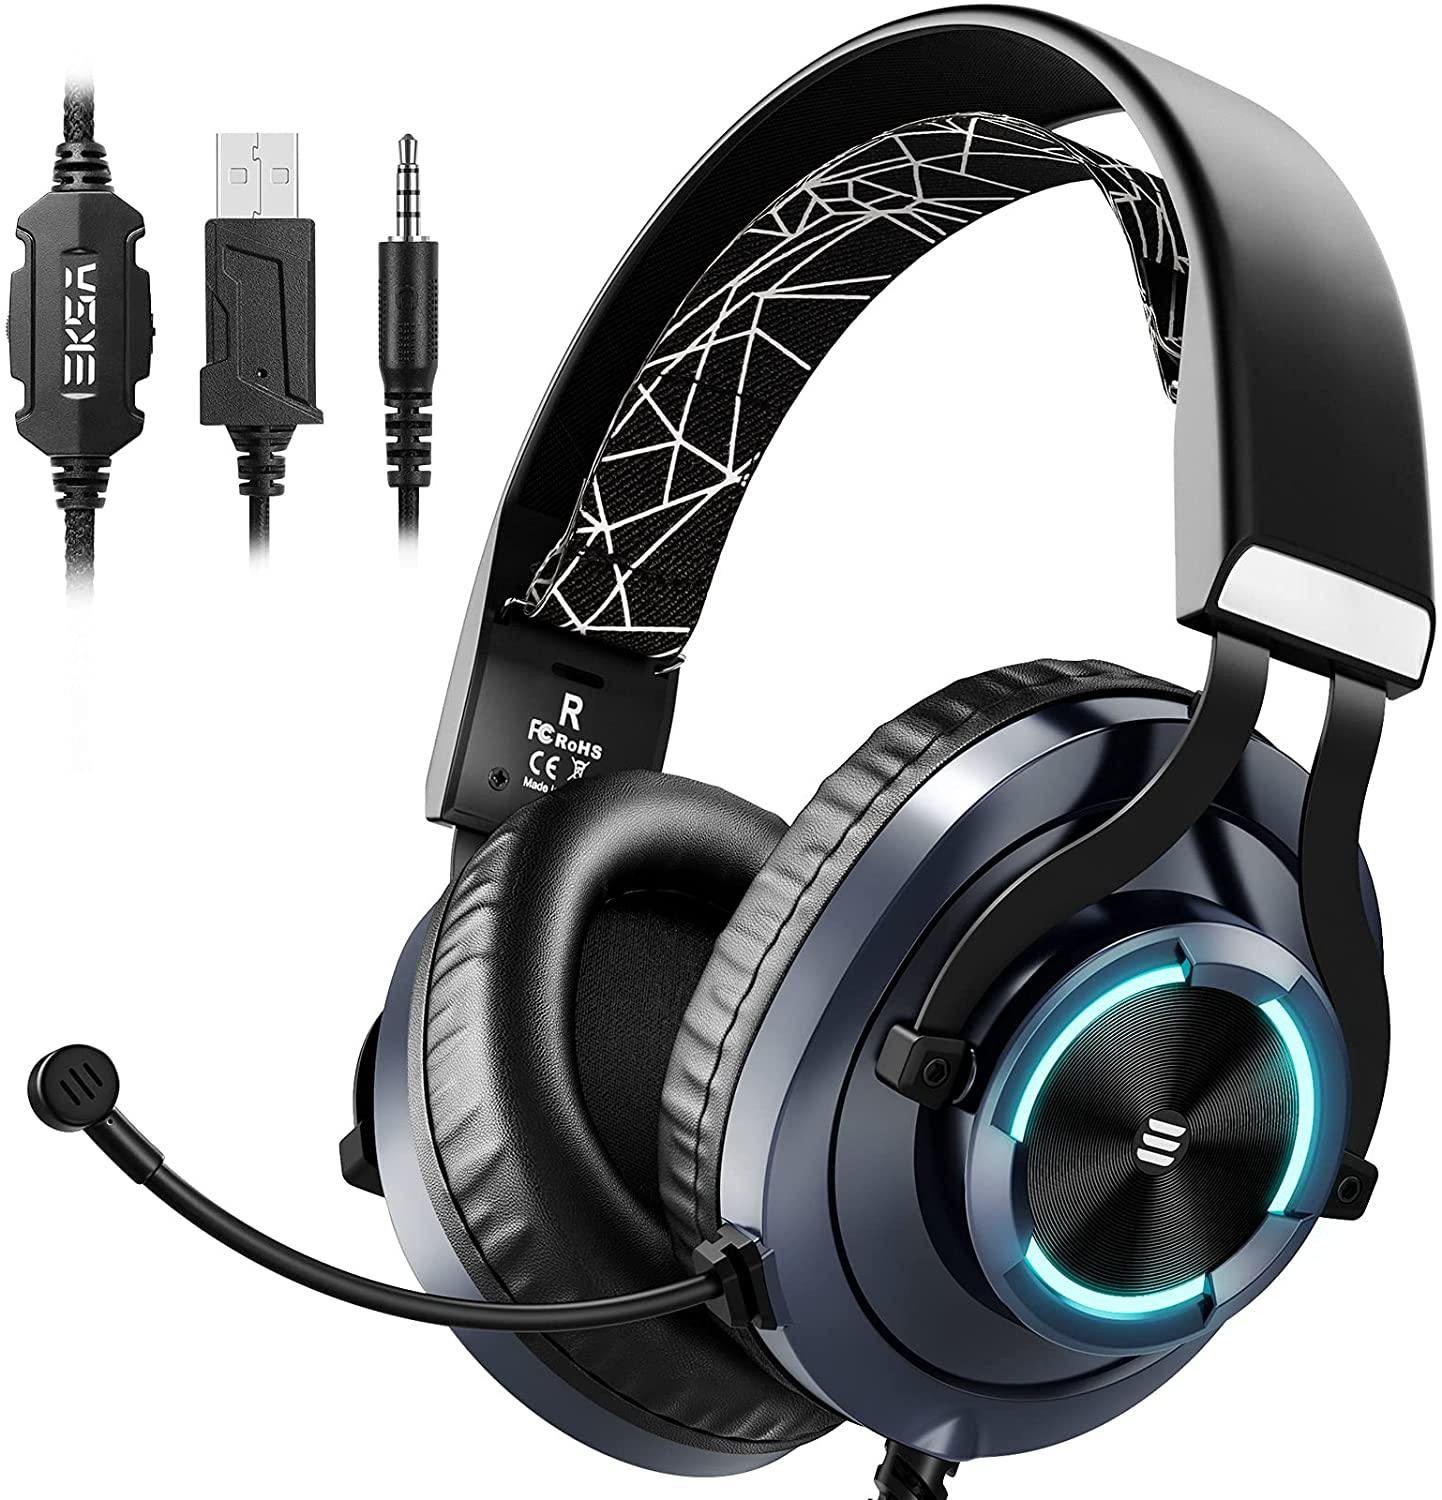 EKSA E3000 Wired Gaming Headset with RGB light